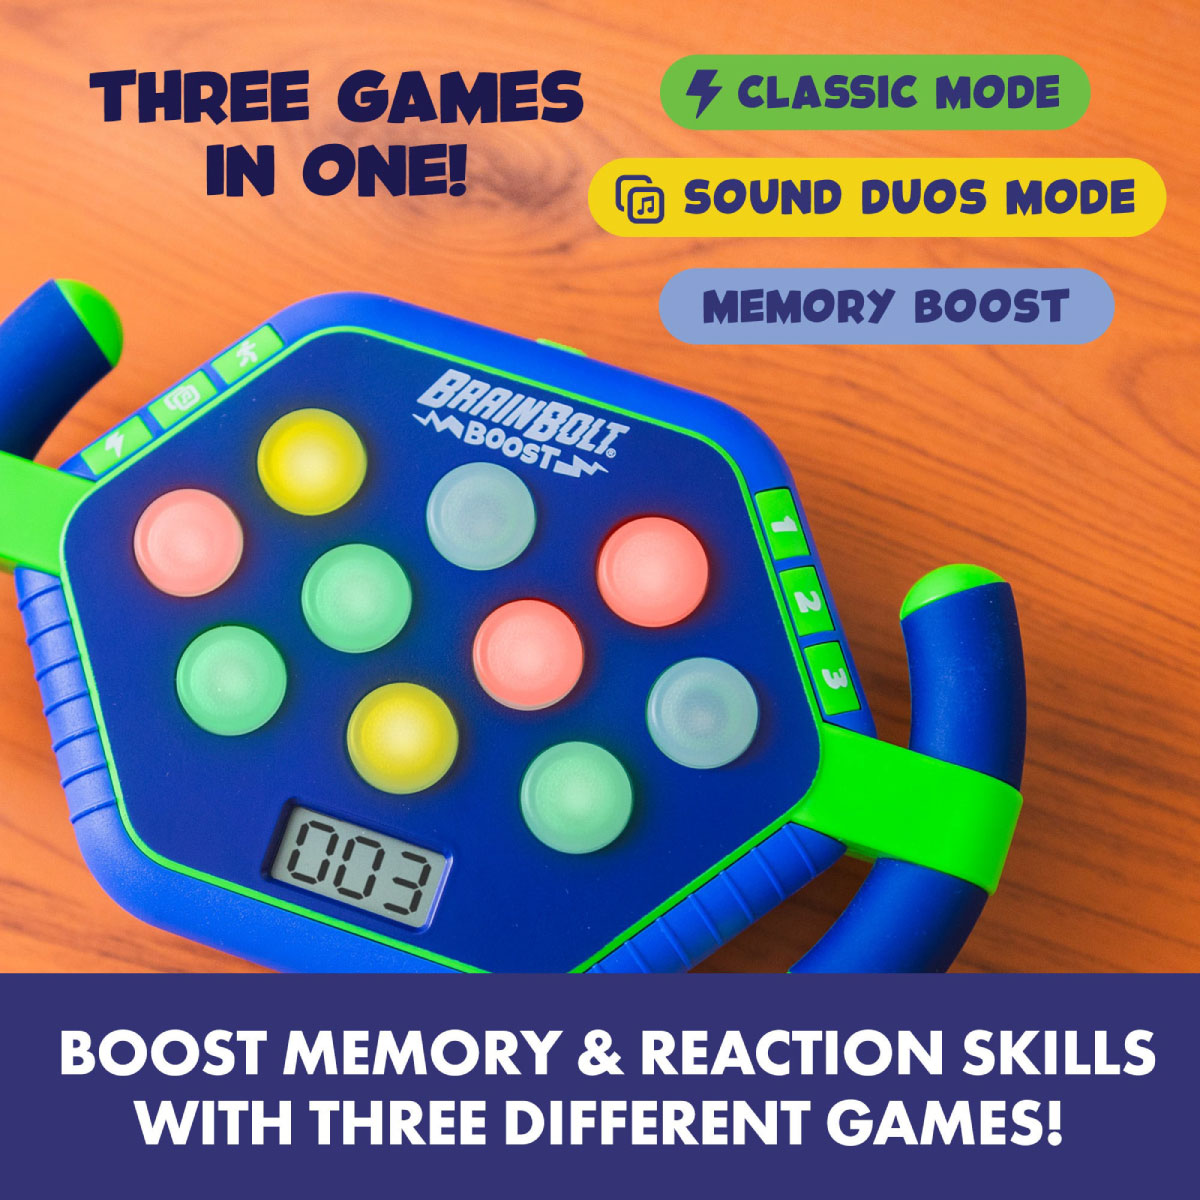 Educational Insights Brainbolt Boost Electronic Memory Game